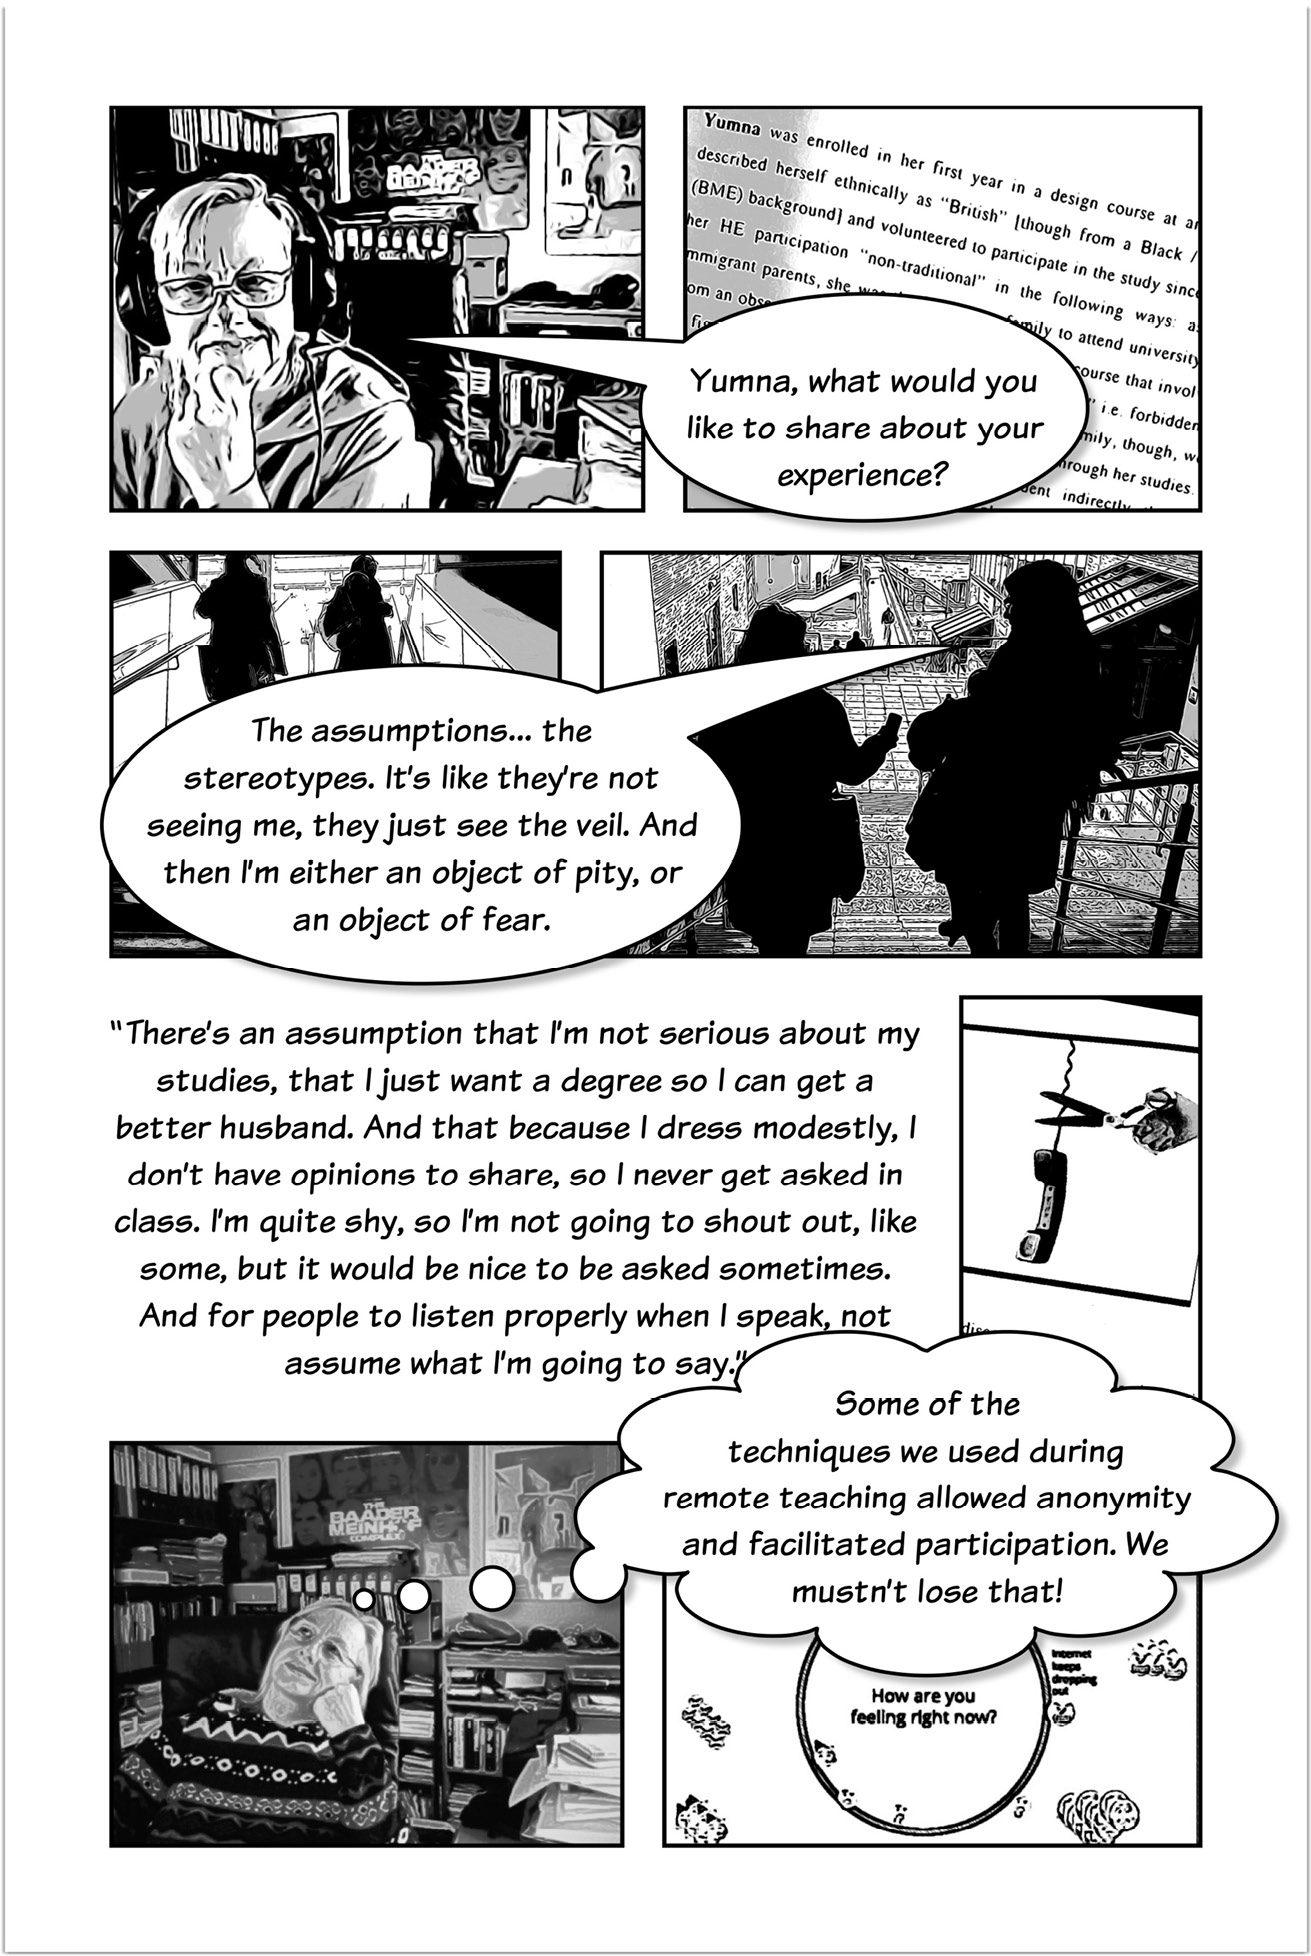 Four-panelled sequence of a comic strip, with Trowlerís character having a speech bubble saying ìYumna, what would you like to share about your experience?î followed by a bubble speech with the answer reading ìThe assumptions the stereotypes. Itís like theyíre not seeing me, they just see the veil. And then Iím either an object of pity, or an object of fear.î Another three-panelled sequence introduced by text that reads: Thereís an assumption that Iím not serious about my studies, that I just want a degree so I can get a better husband. And that because I dress modestly, I donít have opinions to share, so I never get asked in class. Iím quite shy, so Iím not going to shout out, like some, but it would be nice to be asked sometimes. And for people to listen properly when I speak, not assume what Iím going to say. One of the panels shows someoneís hand cutting a phone wire with scissors. The next one presents Trowlerís character with a thought bubble that reads:  Some of the techniques we used during remote teaching allowed anonymity and facilitated participation. We mustnít lose that! The last panel has a text that reads: How are you feeling right now?       